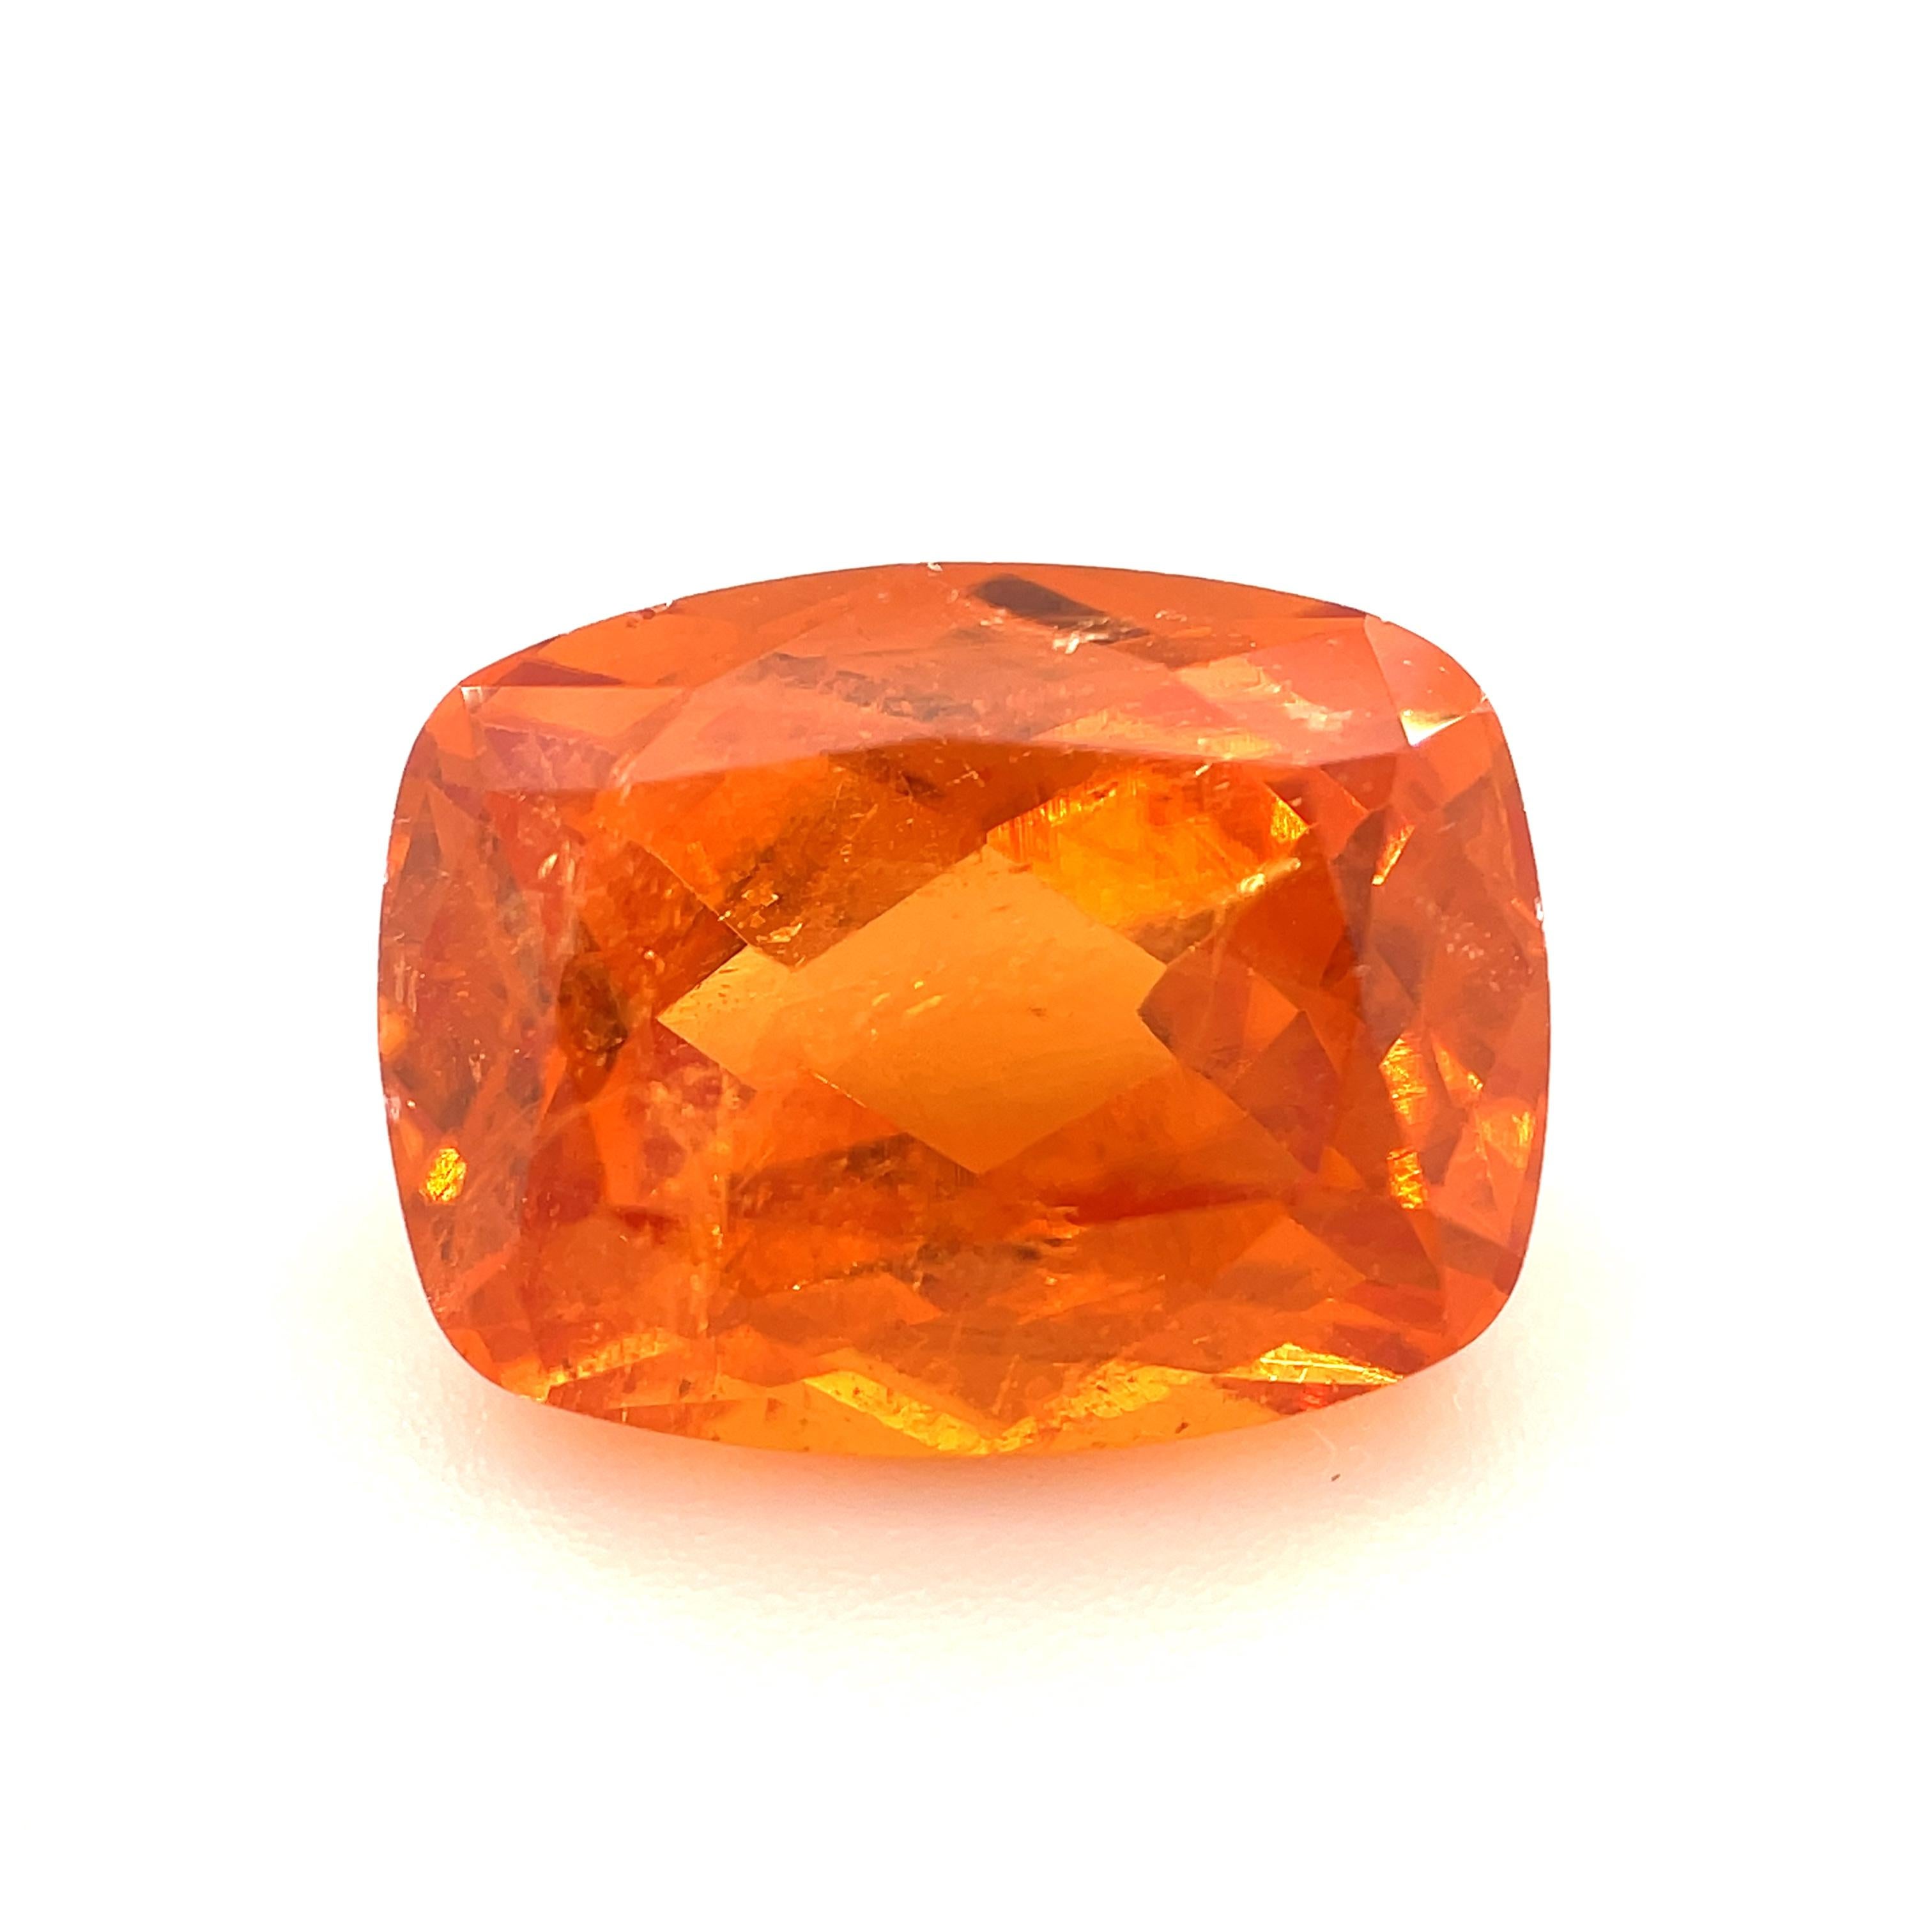 Few people know that garnets occur naturally in every color but blue. One such color is the spessartite garnet variety, prized by collectors because of its rich orange hues and exceptional luster. The finest color of spessartite is called